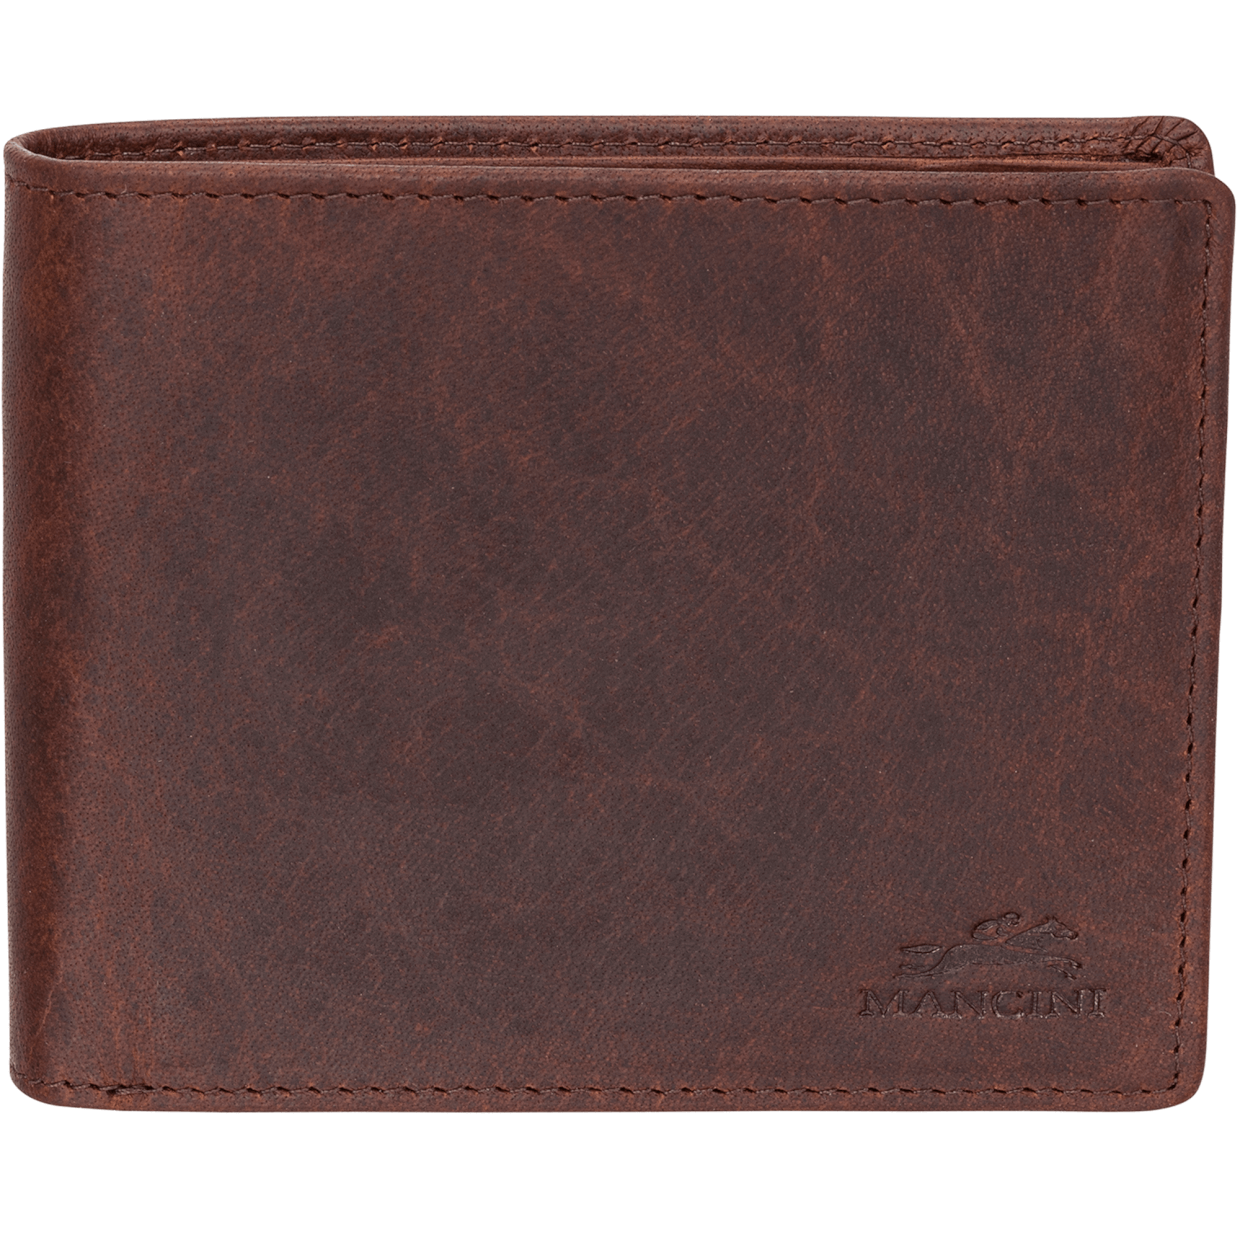 Mancini BUFFALO RFID Secure Wallet with Coin Pocket - Brown